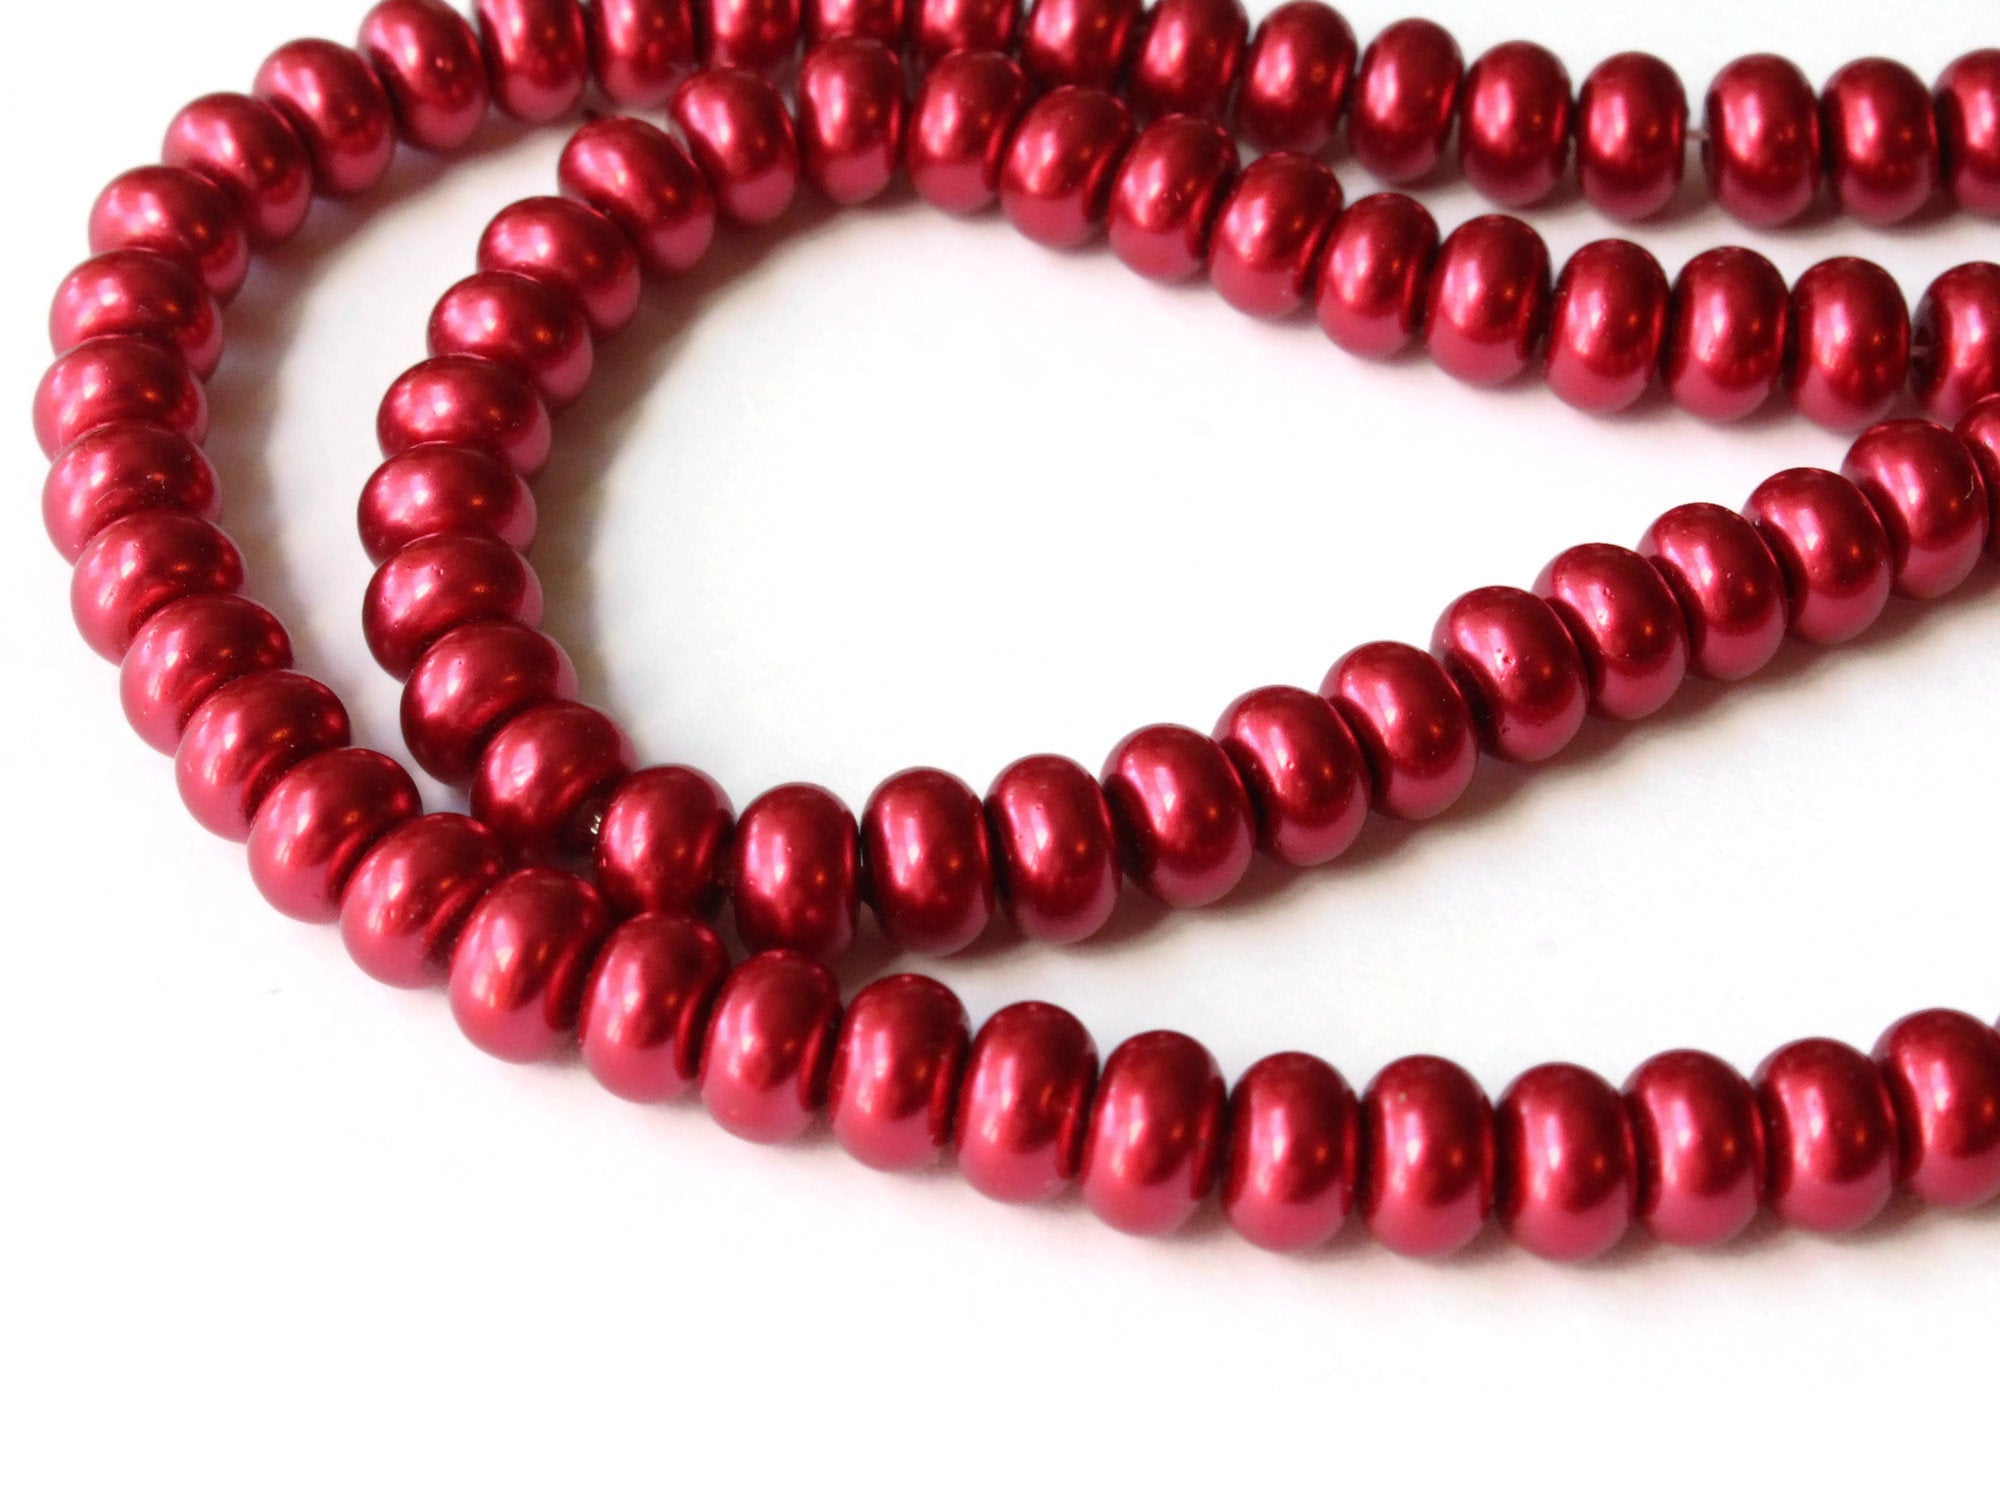 90 6mm Red Rondelle Glass Pearl Beads by Smileyboy Beads | Michaels